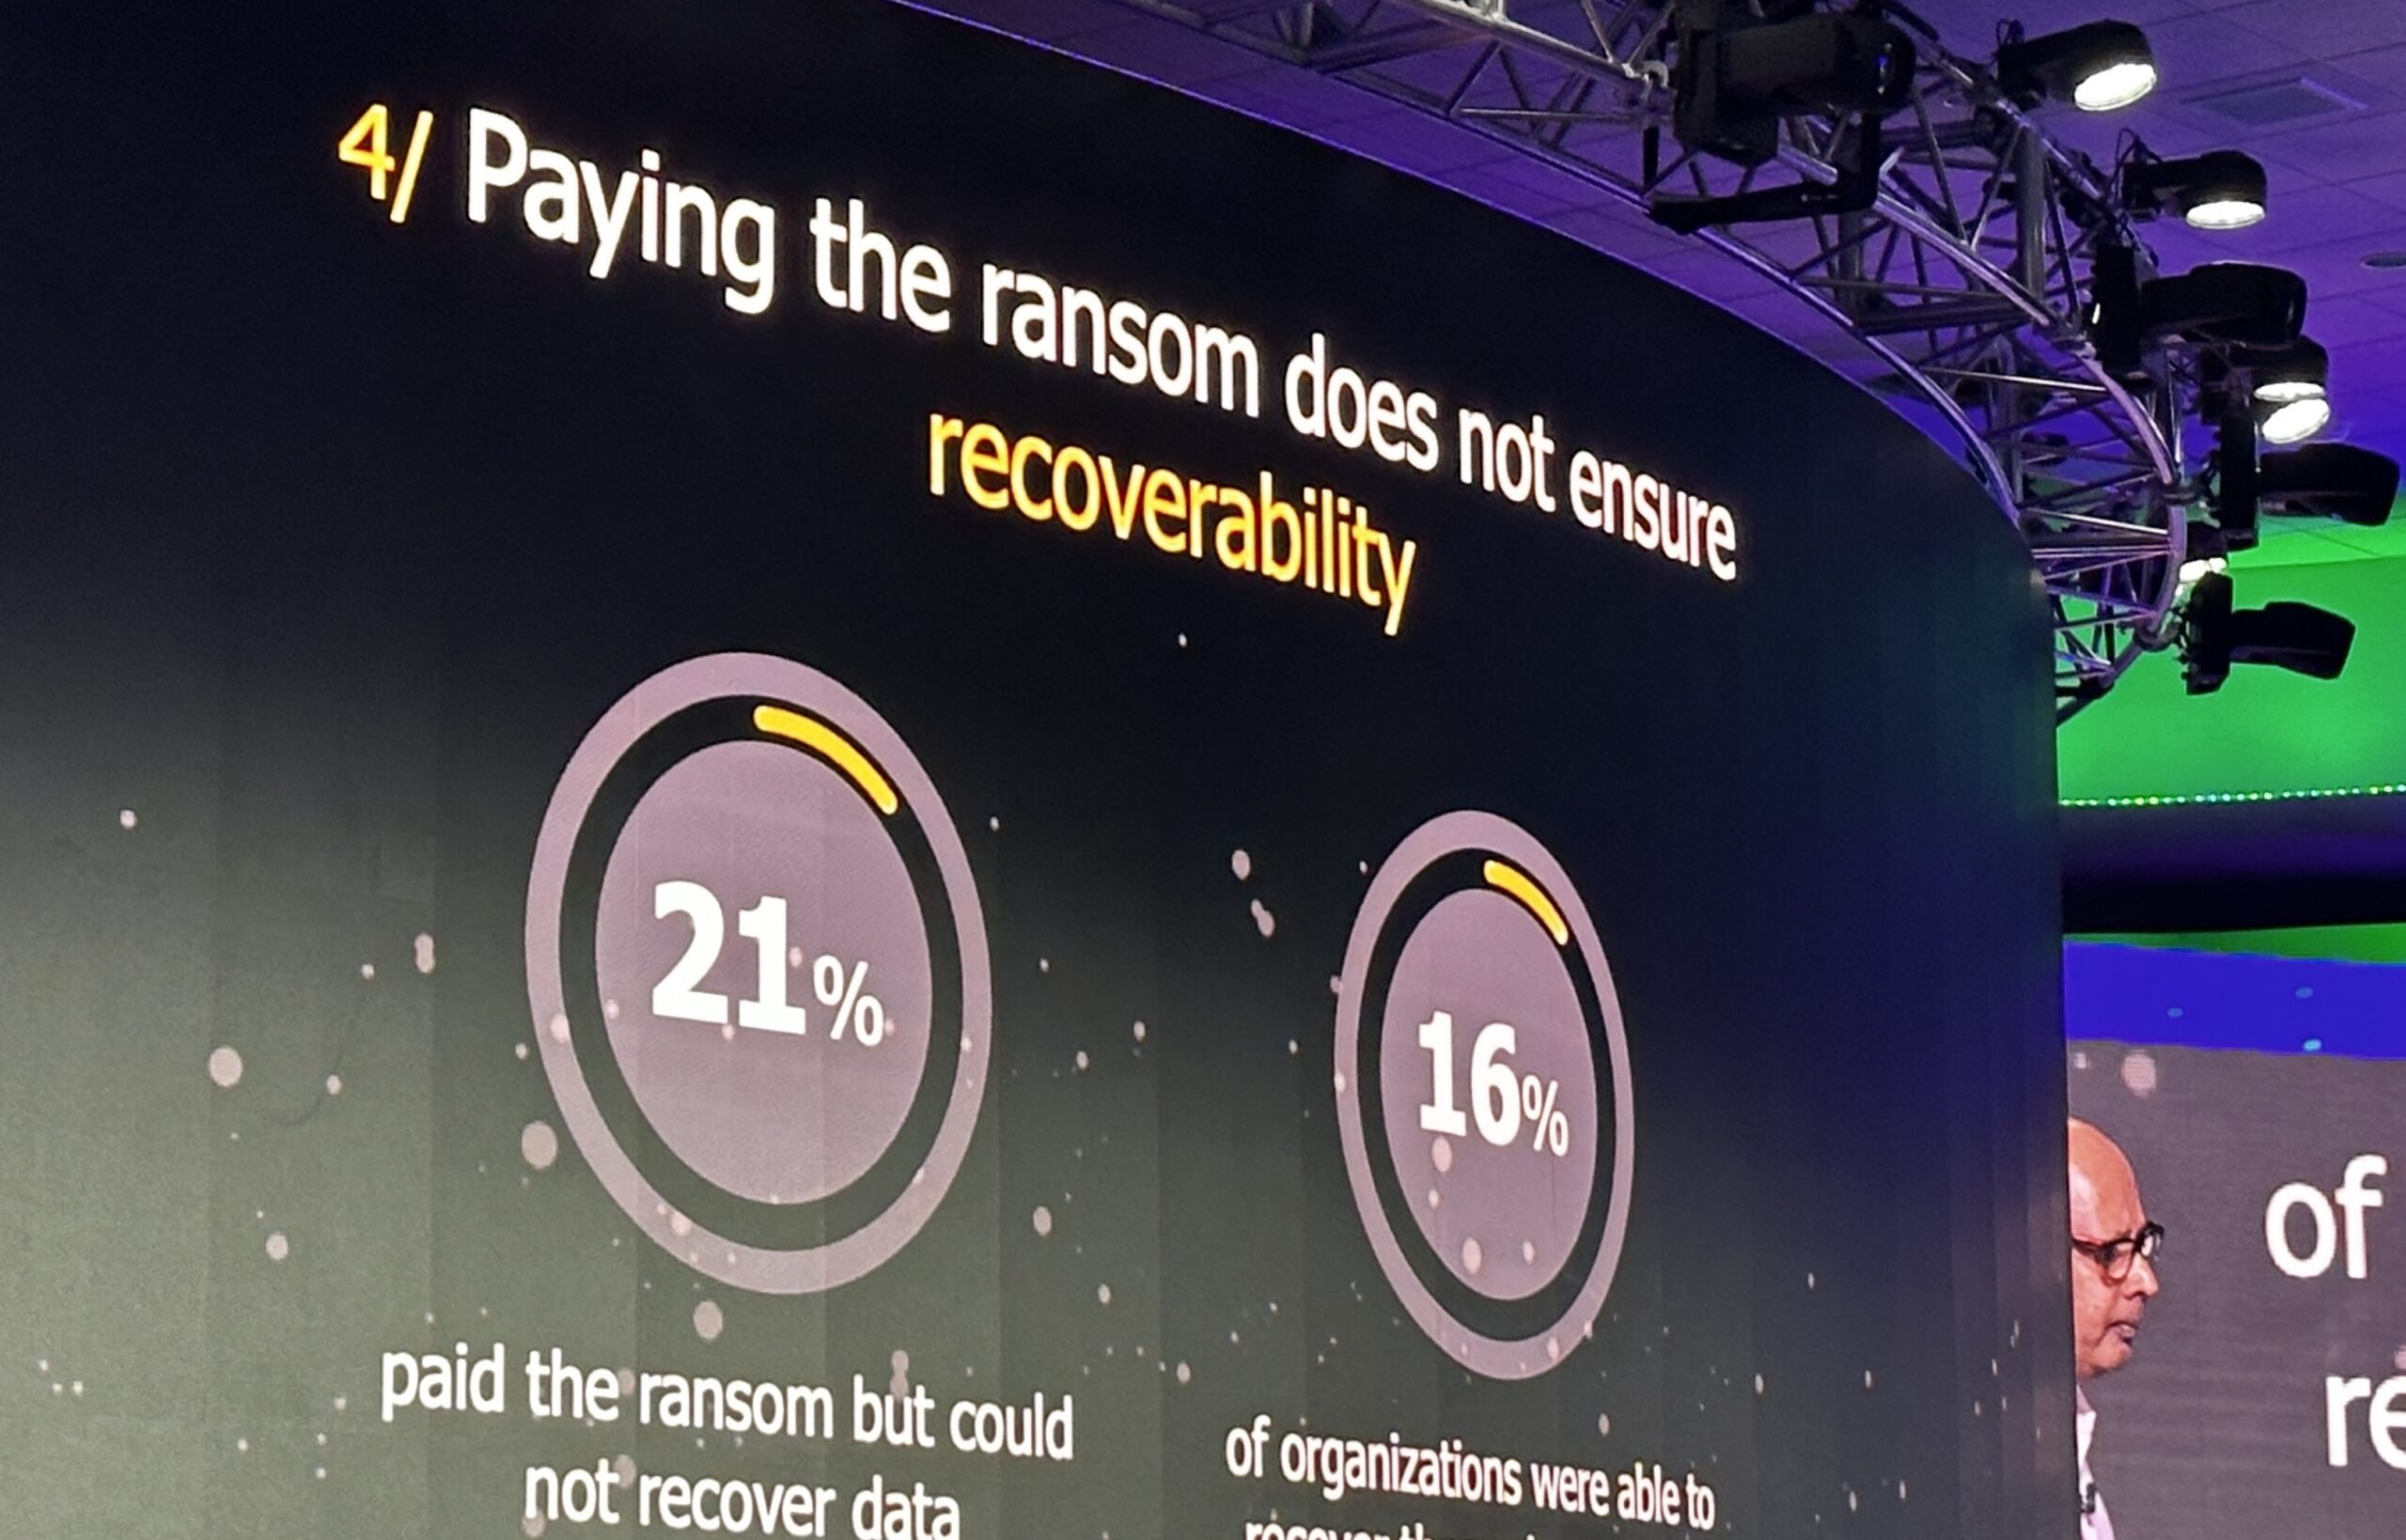 Veeam: Ransomware keeps rising, and paying fraudsters is still not the right approach